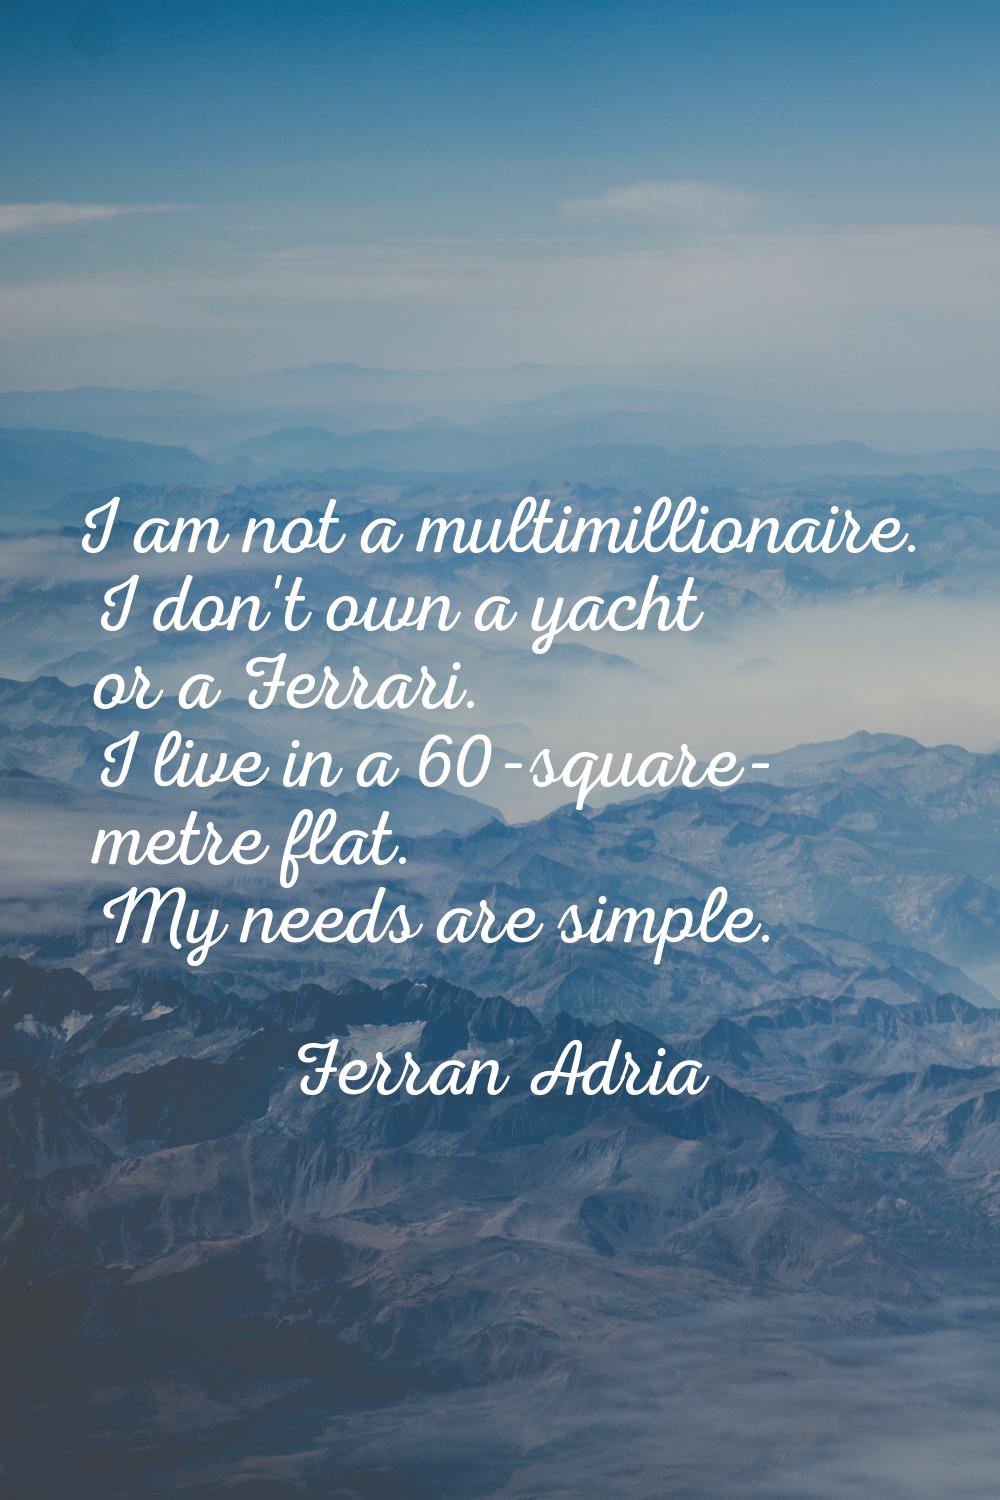 I am not a multimillionaire. I don't own a yacht or a Ferrari. I live in a 60-square- metre flat. M